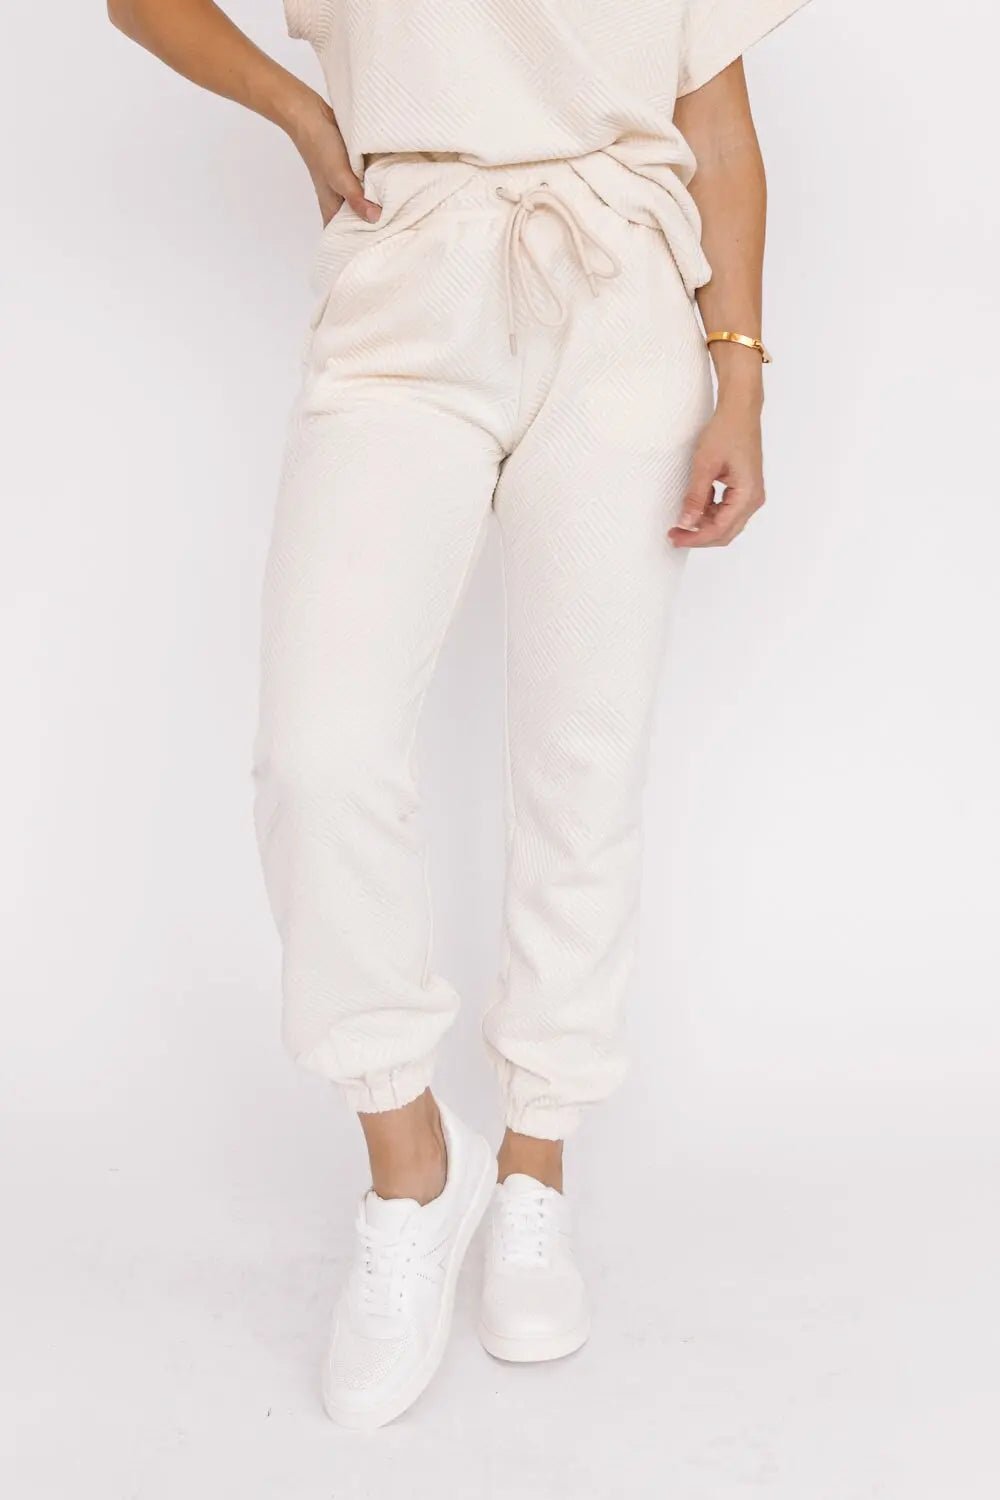 Weekend Vibe Cream Textured Joggers